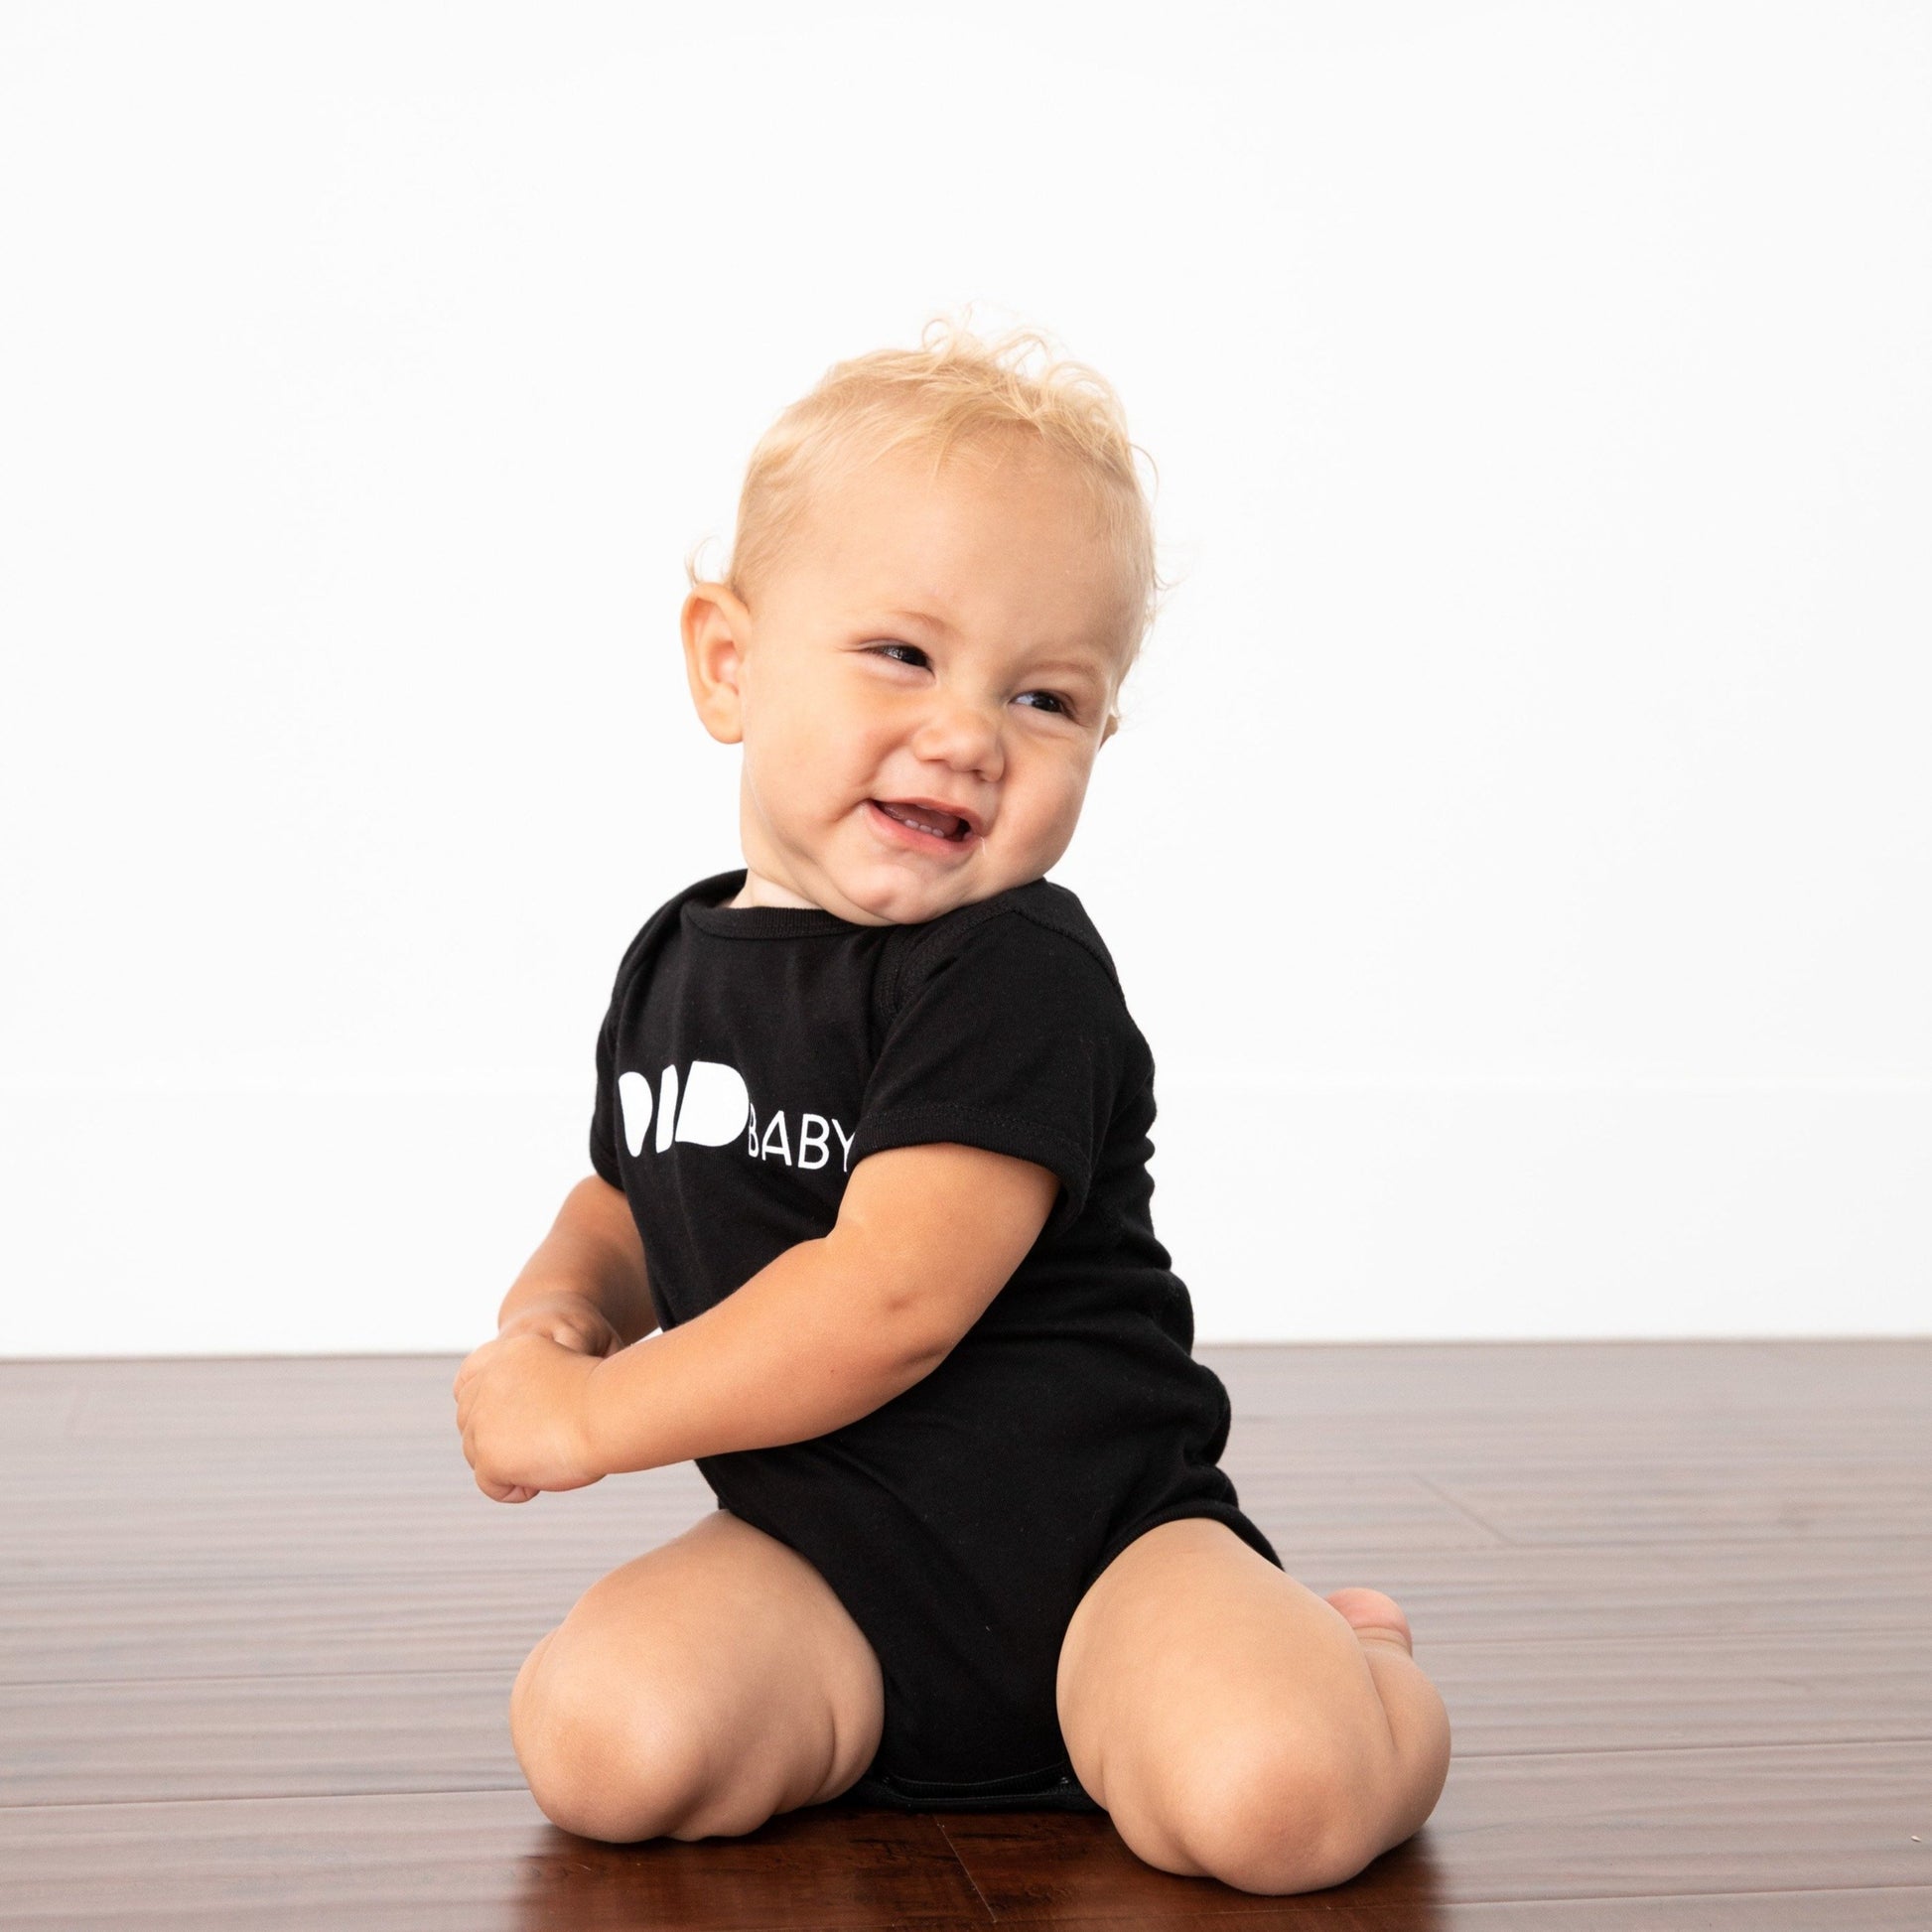 Baby on knees twisting holding hands in black onesie with ODD baby written in white letters